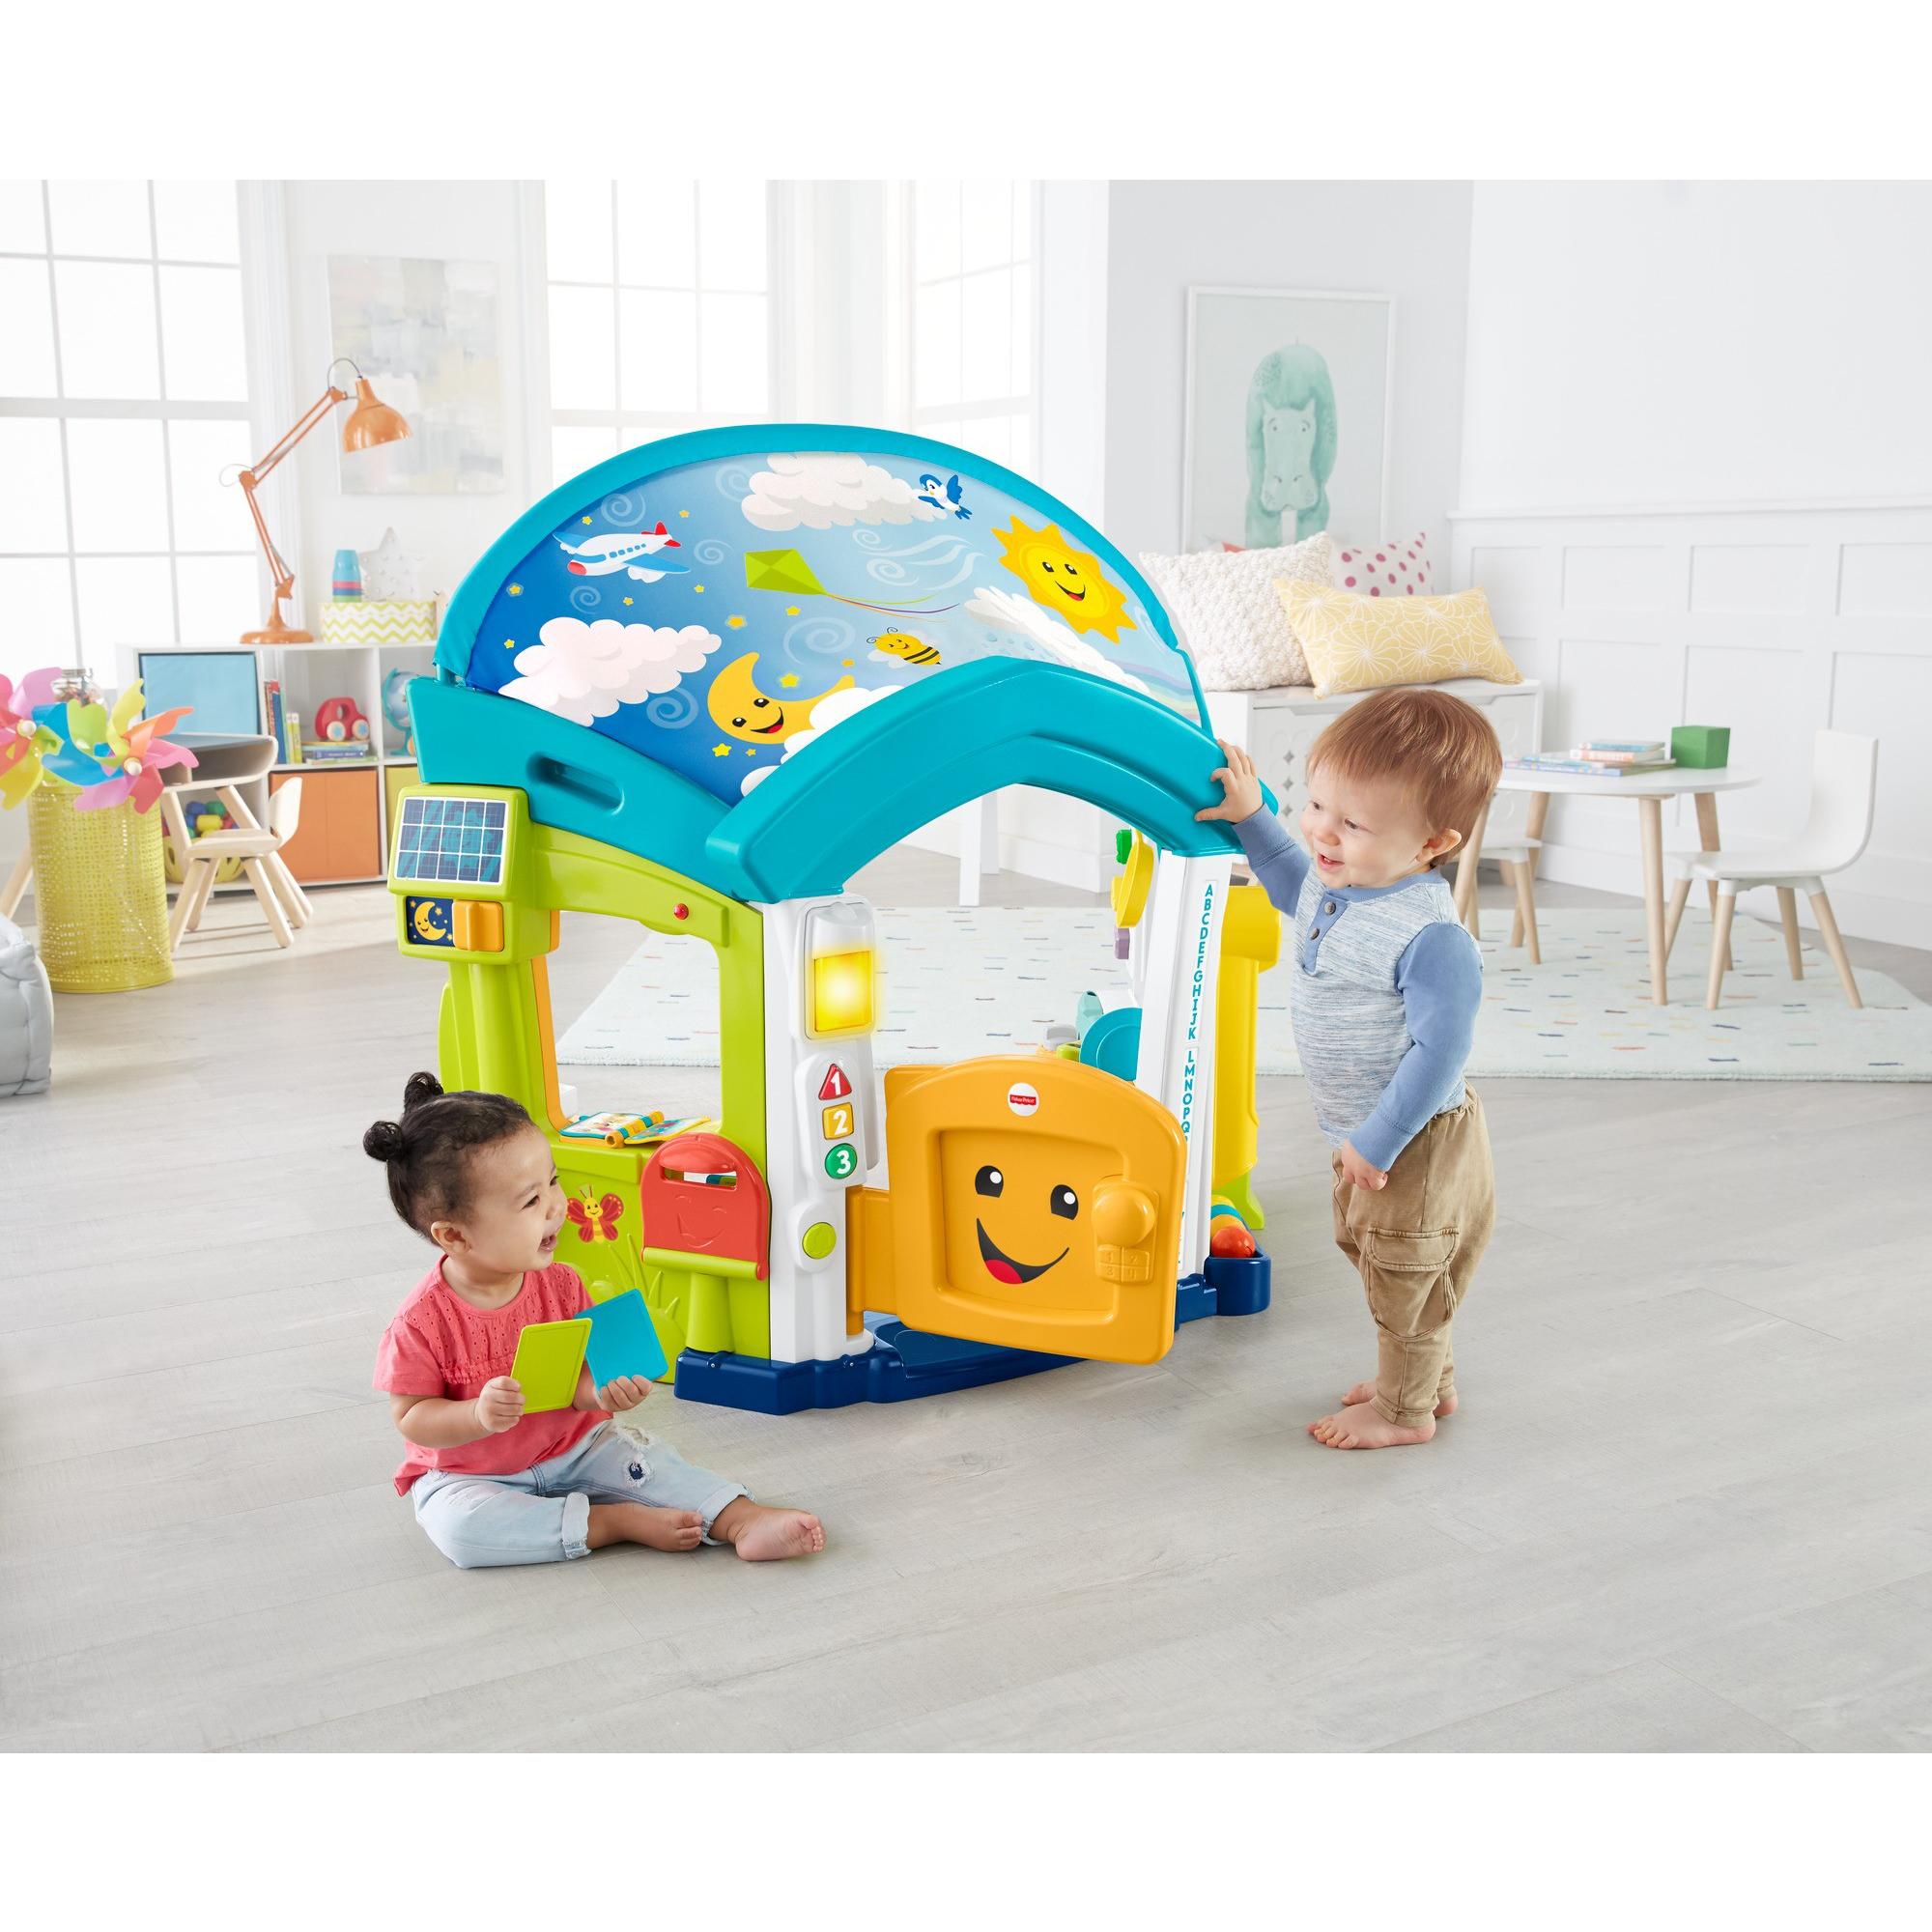 Fisher-Price Laugh & Learn Playhouse Educational Toy for Babies & Toddlers, Smart Learning Home - image 20 of 25